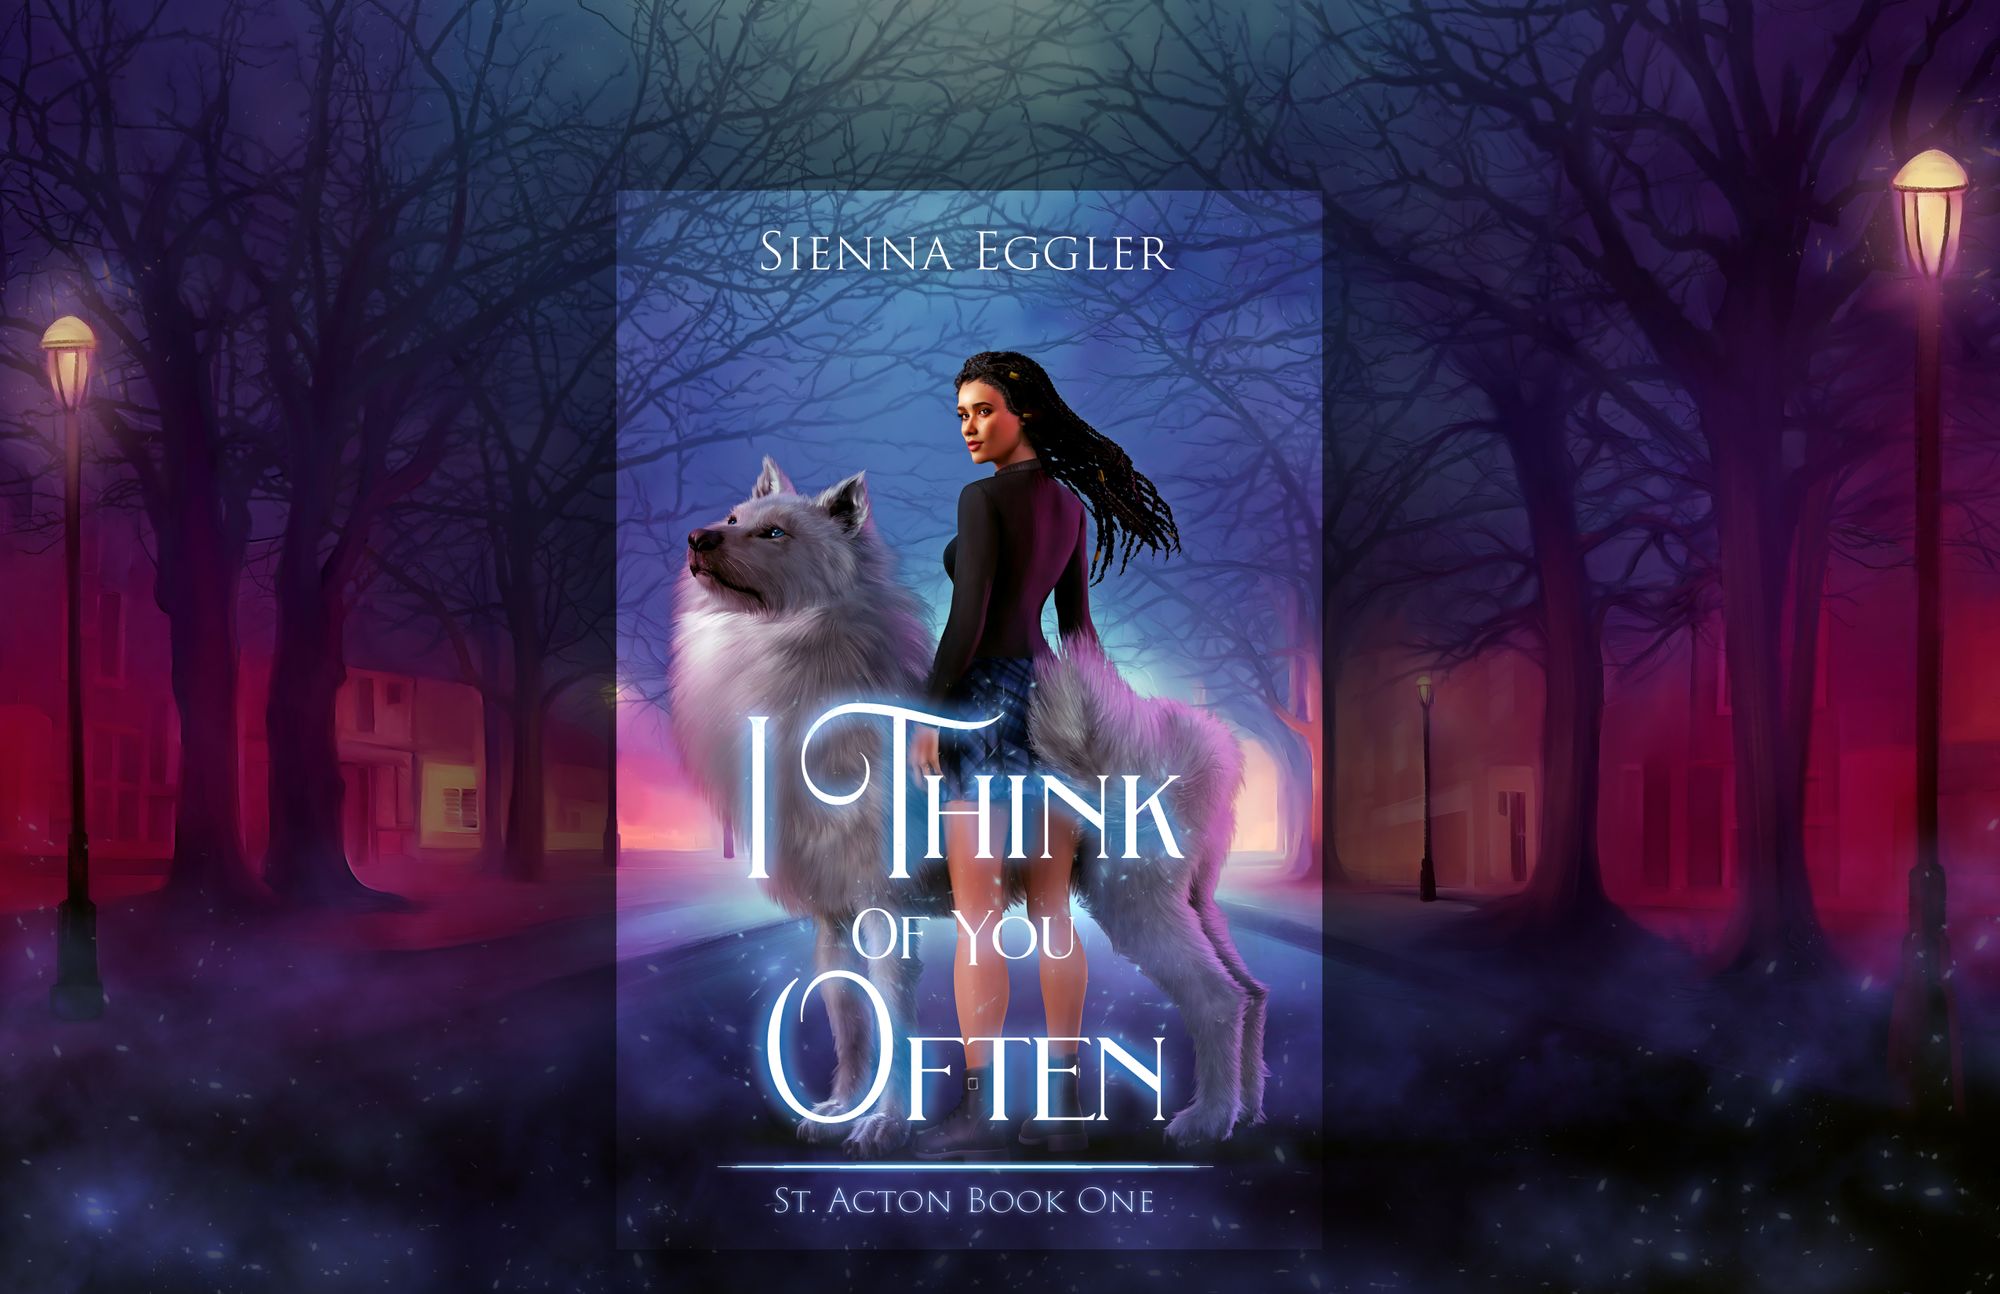 I Think of You Often (St. Acton, Book One). Cover features a biracial and femme presenting person posing with a wolf, in a darkish town with red and blueish hues.